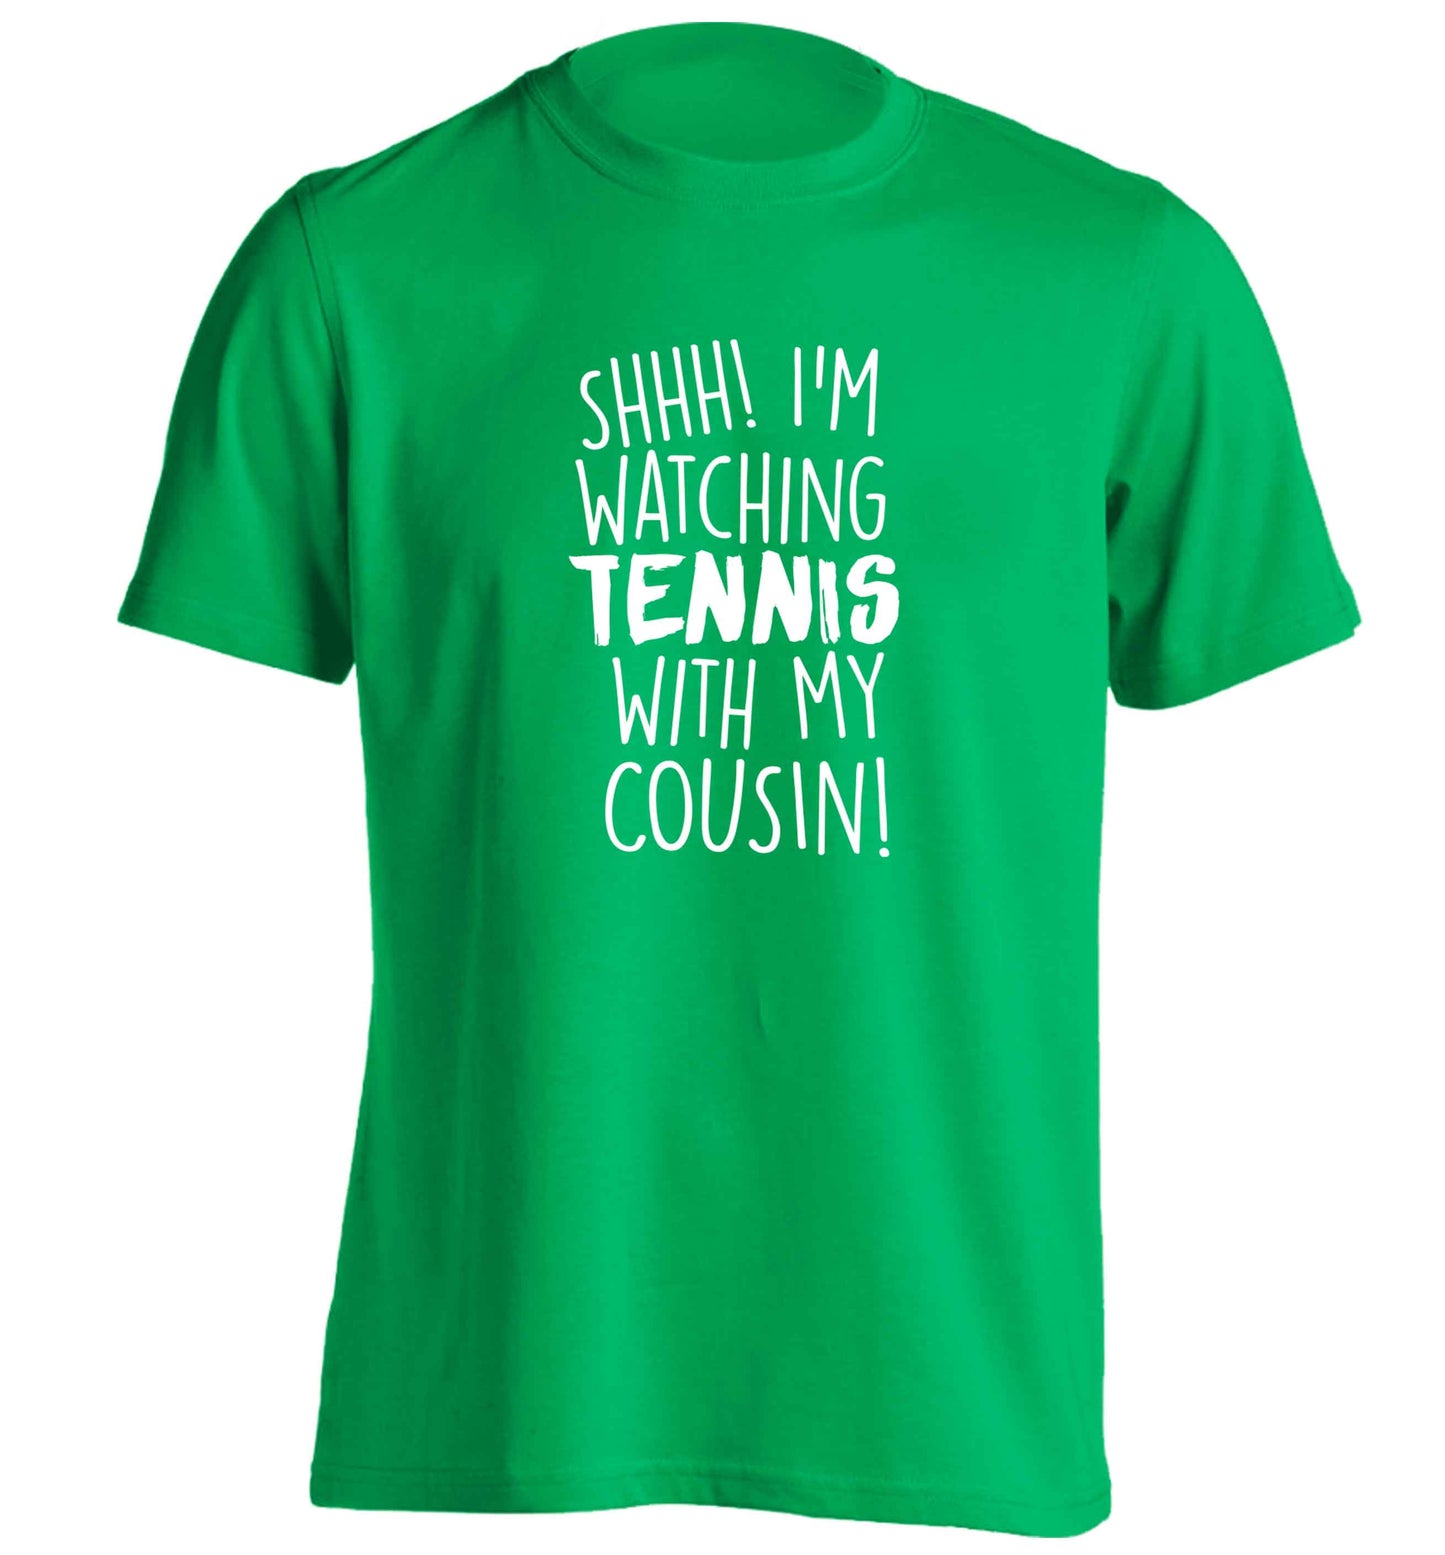 Shh! I'm watching tennis with my cousin! adults unisex green Tshirt 2XL